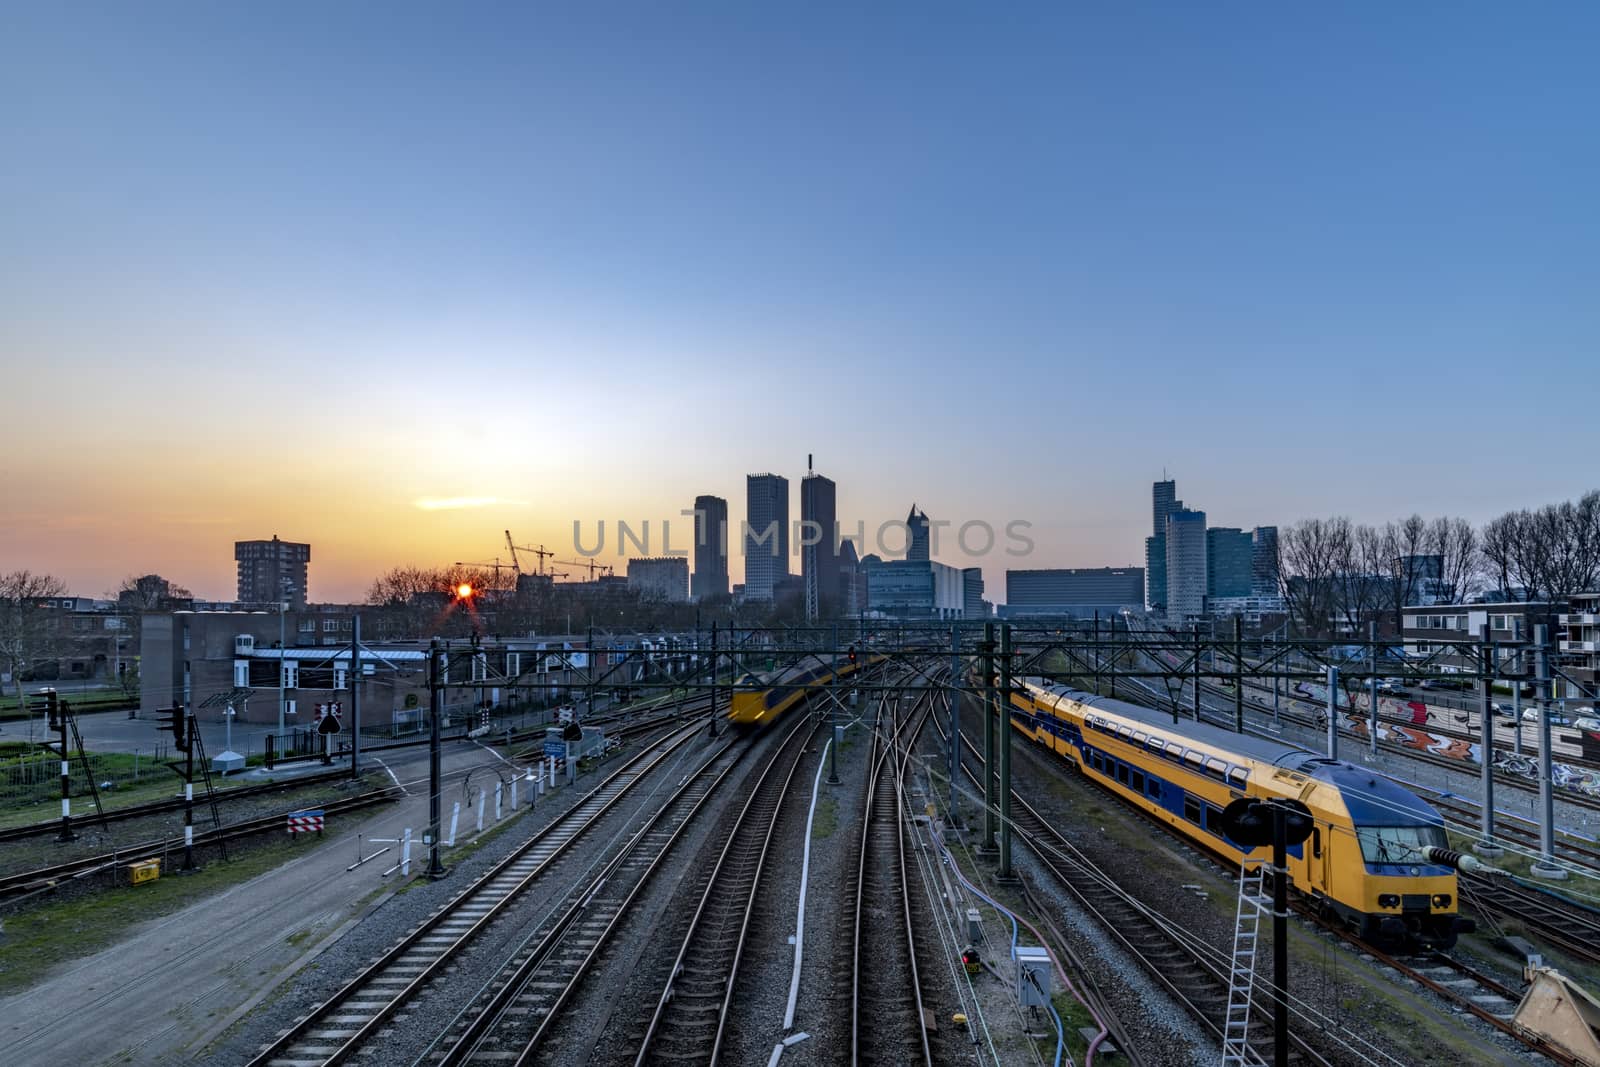 The Hague (Den Haag in Dutch) skyline during the sunset moment behind the train station by ankorlight